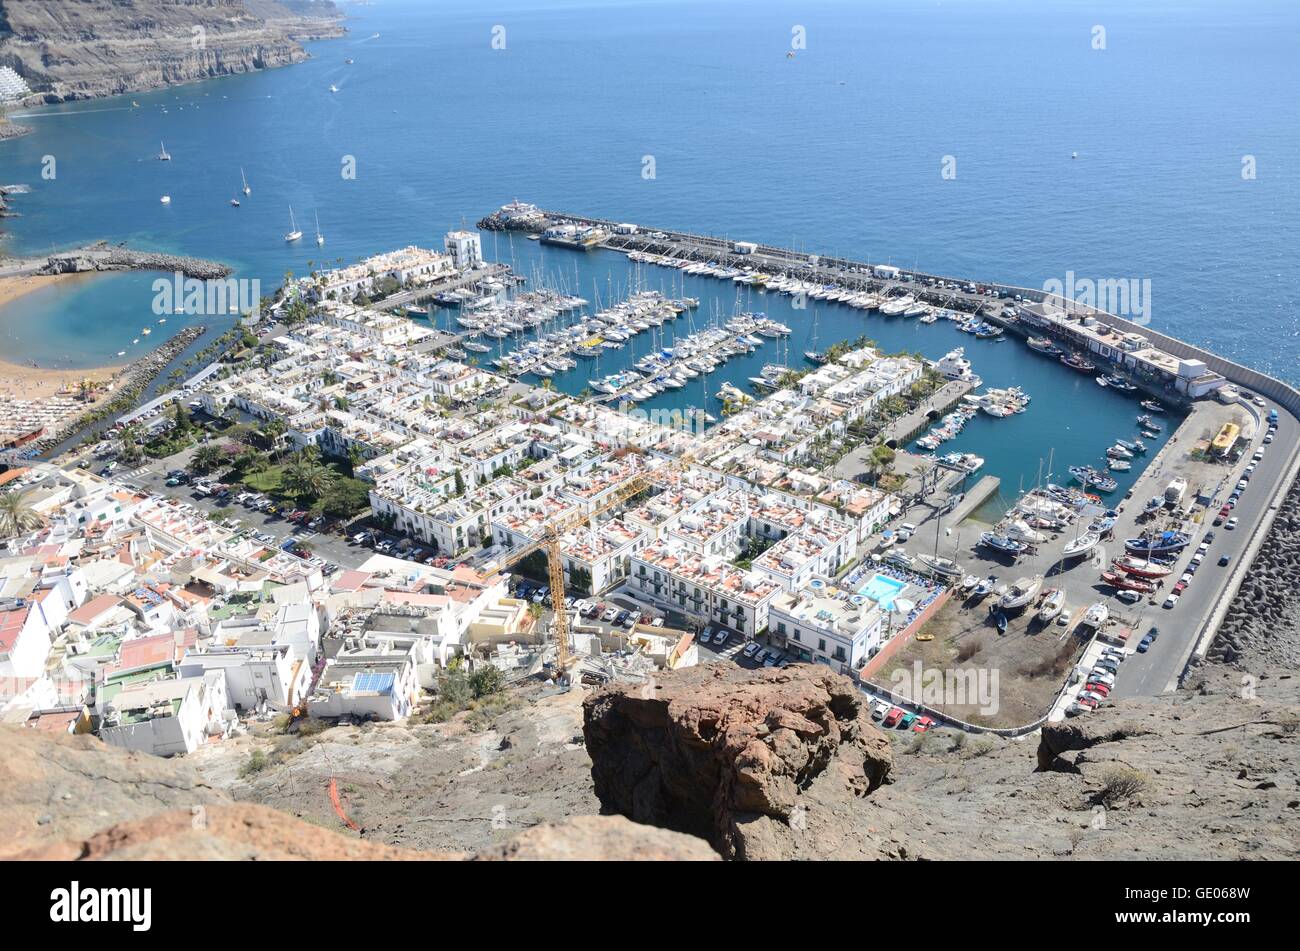 harbour, mogan, puerto, canaria, gran, travel, spain, view, canary islands, marina, old, historic, small, architecture, colorful Stock Photo